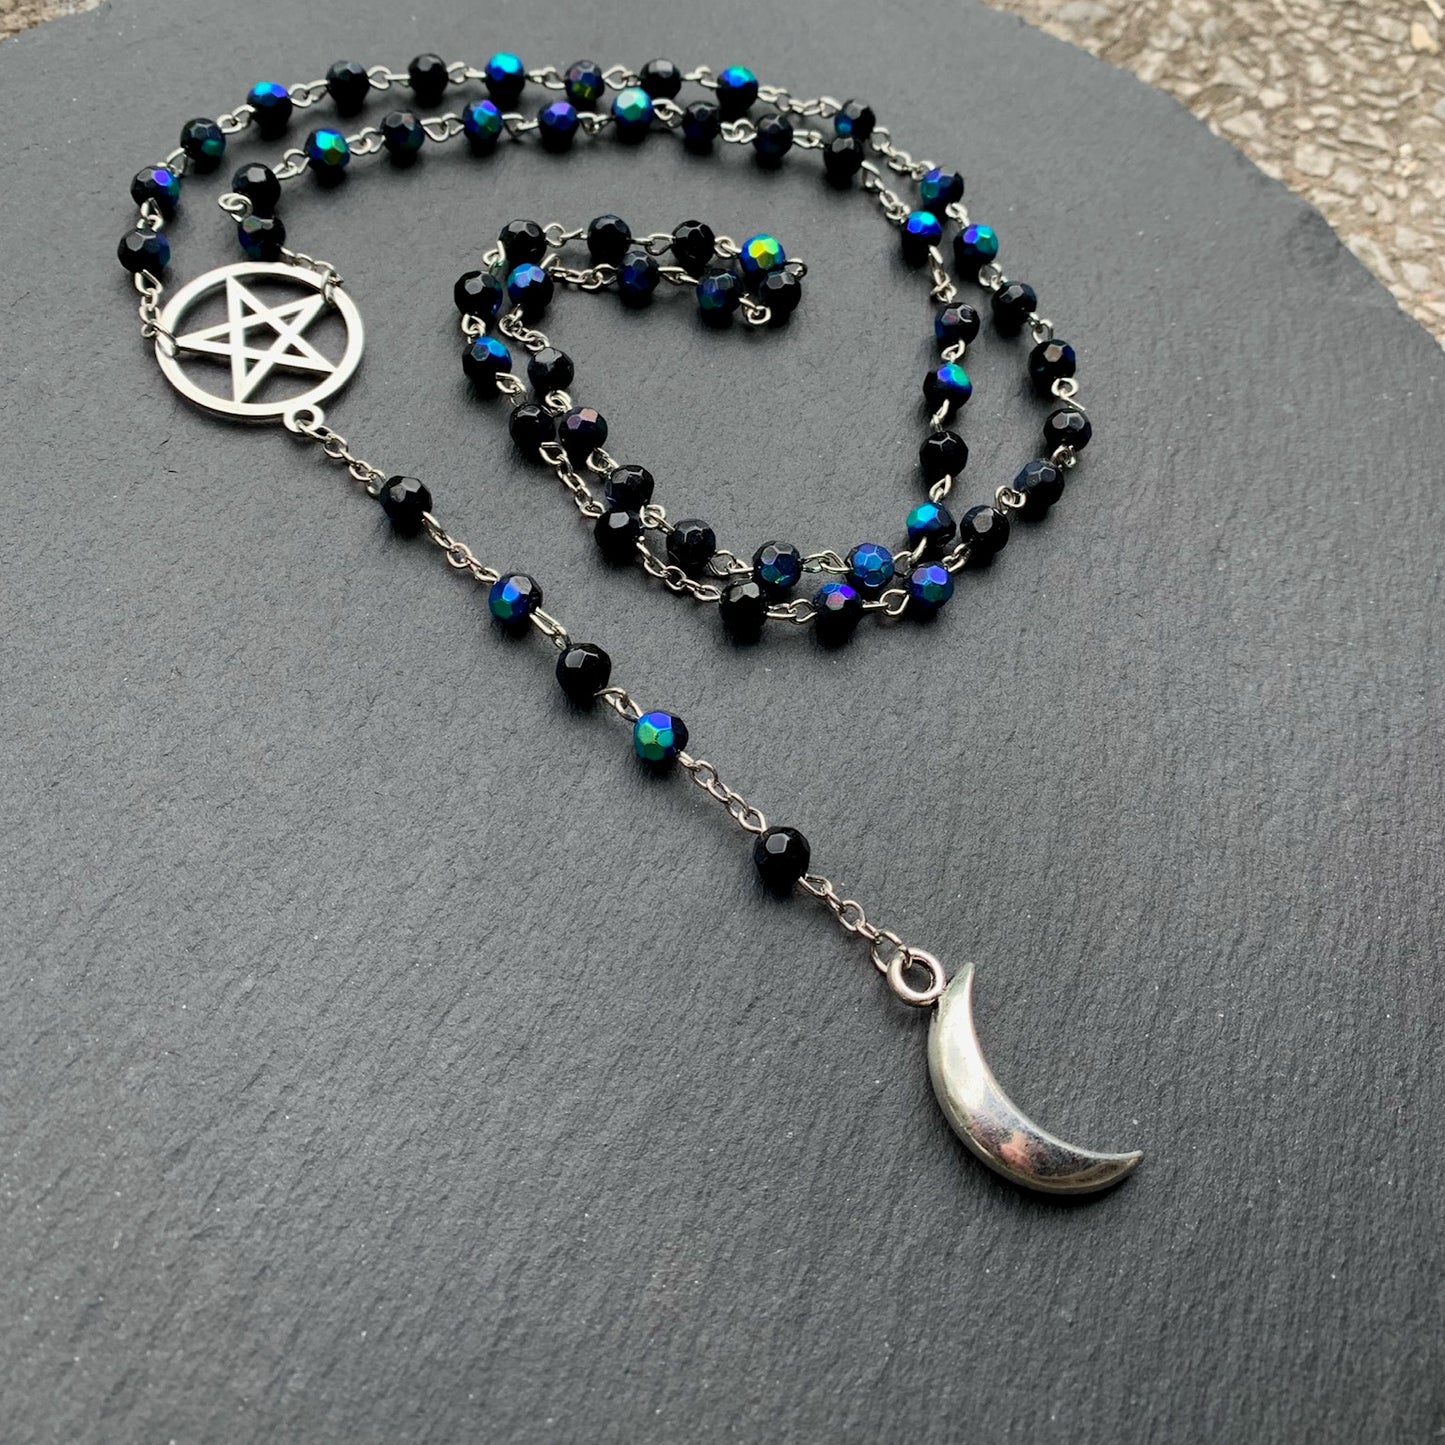 Peacock Aurora Borealis Black Glass Witchy Gothic Long Rosary Necklace With Silver Pentacle And Crescent Moon - Darkmoon Fayre